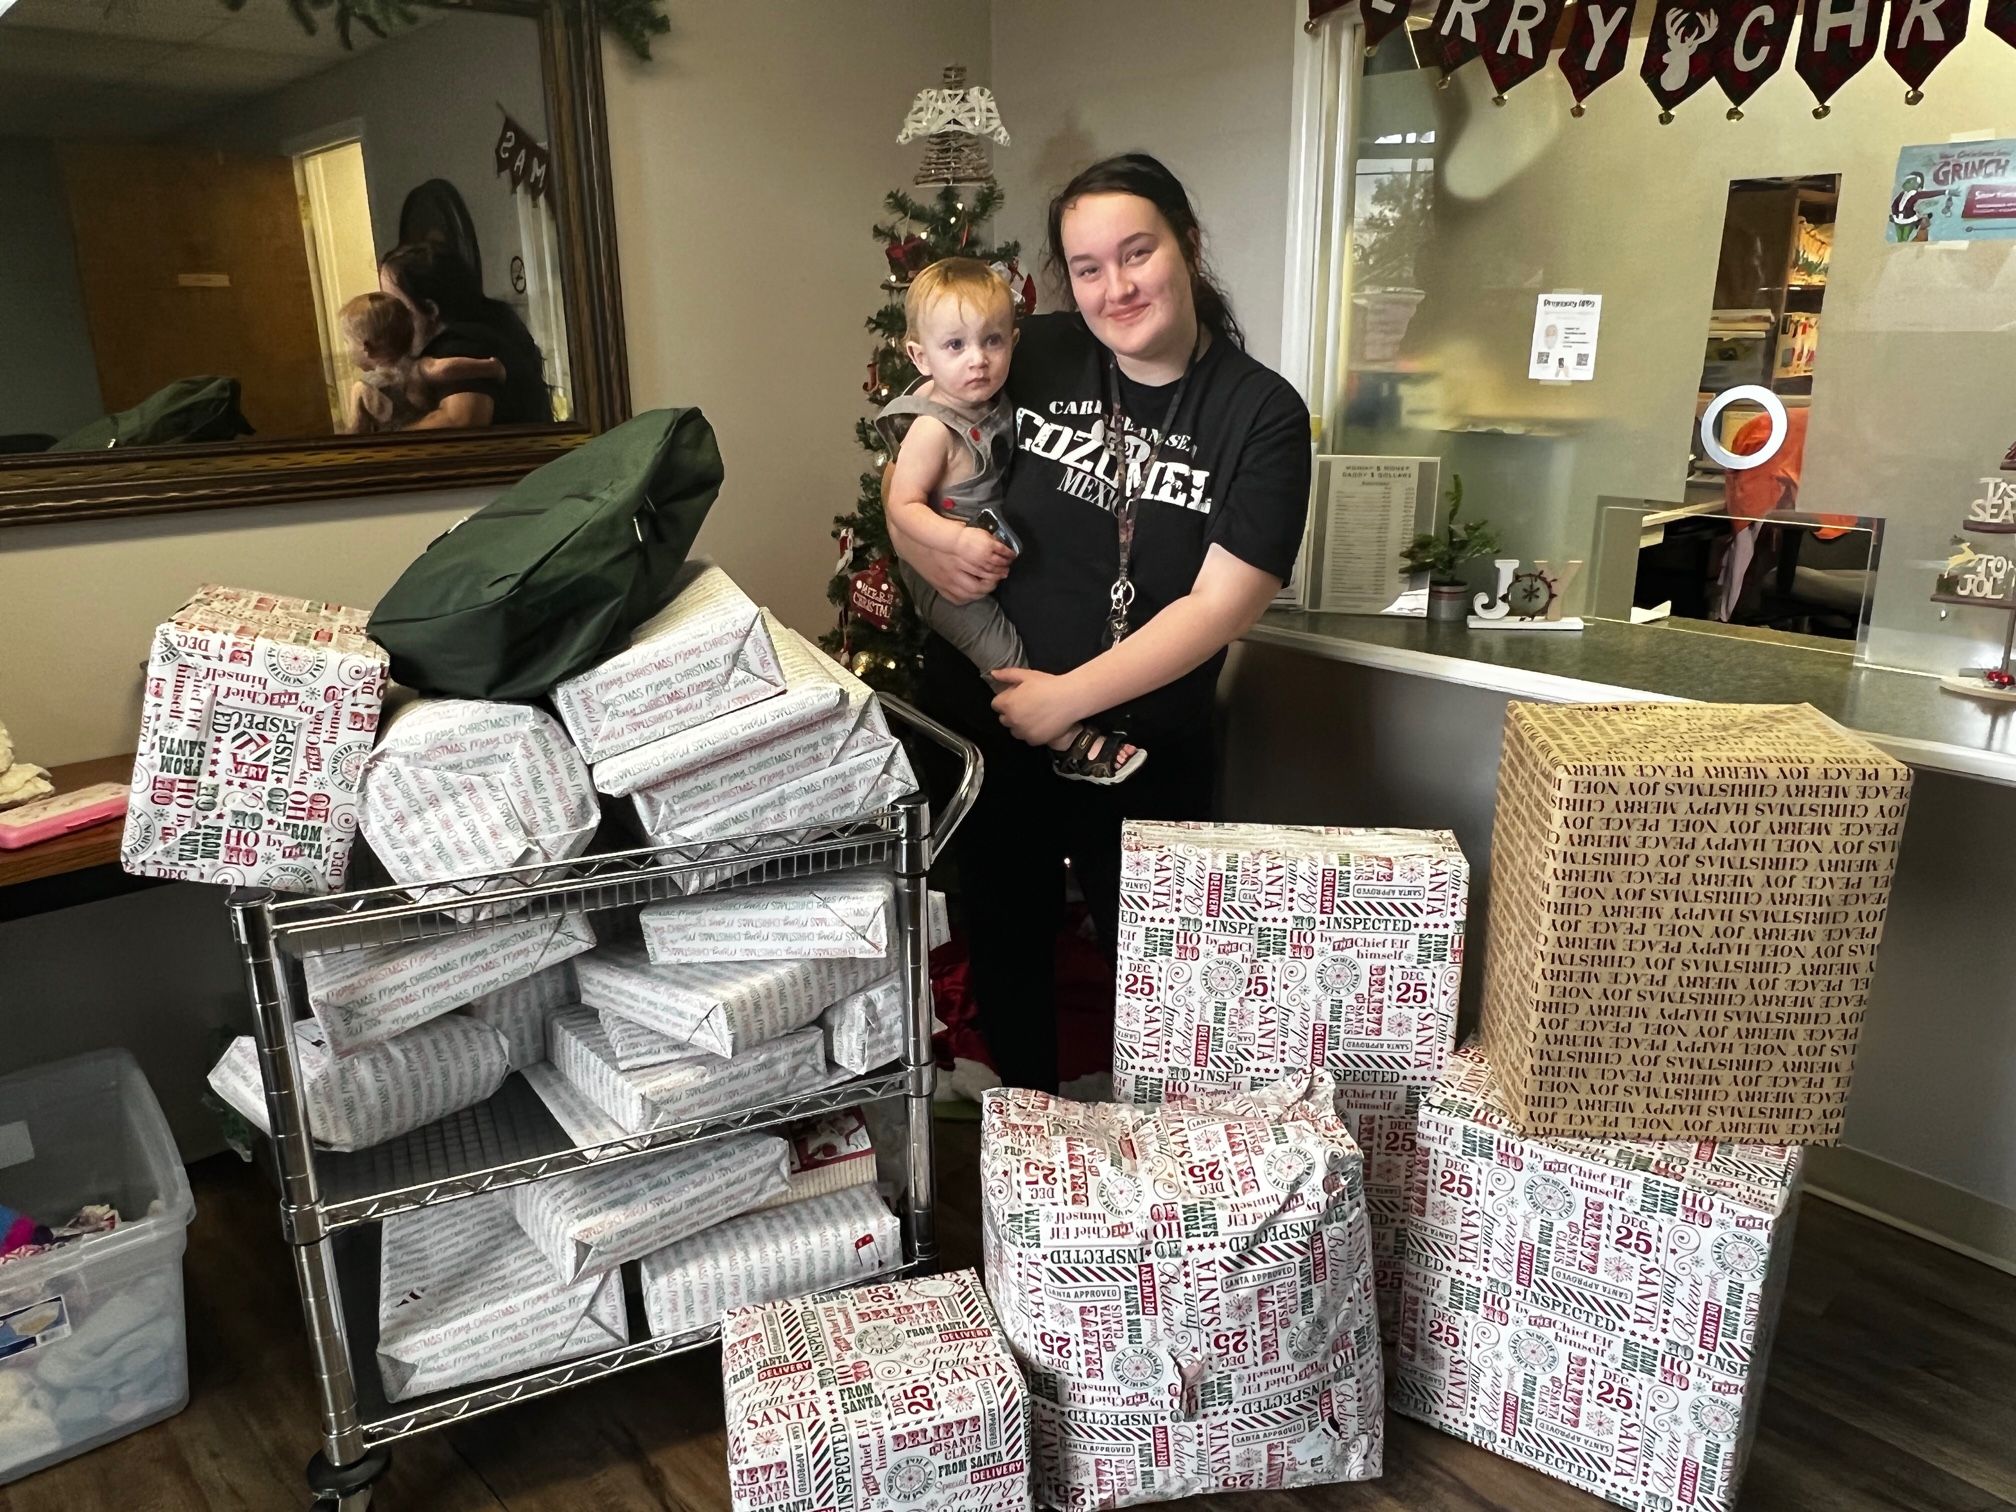 Pro-life pregnancy centers brings ‘happy tears’ this Christmas for women and families